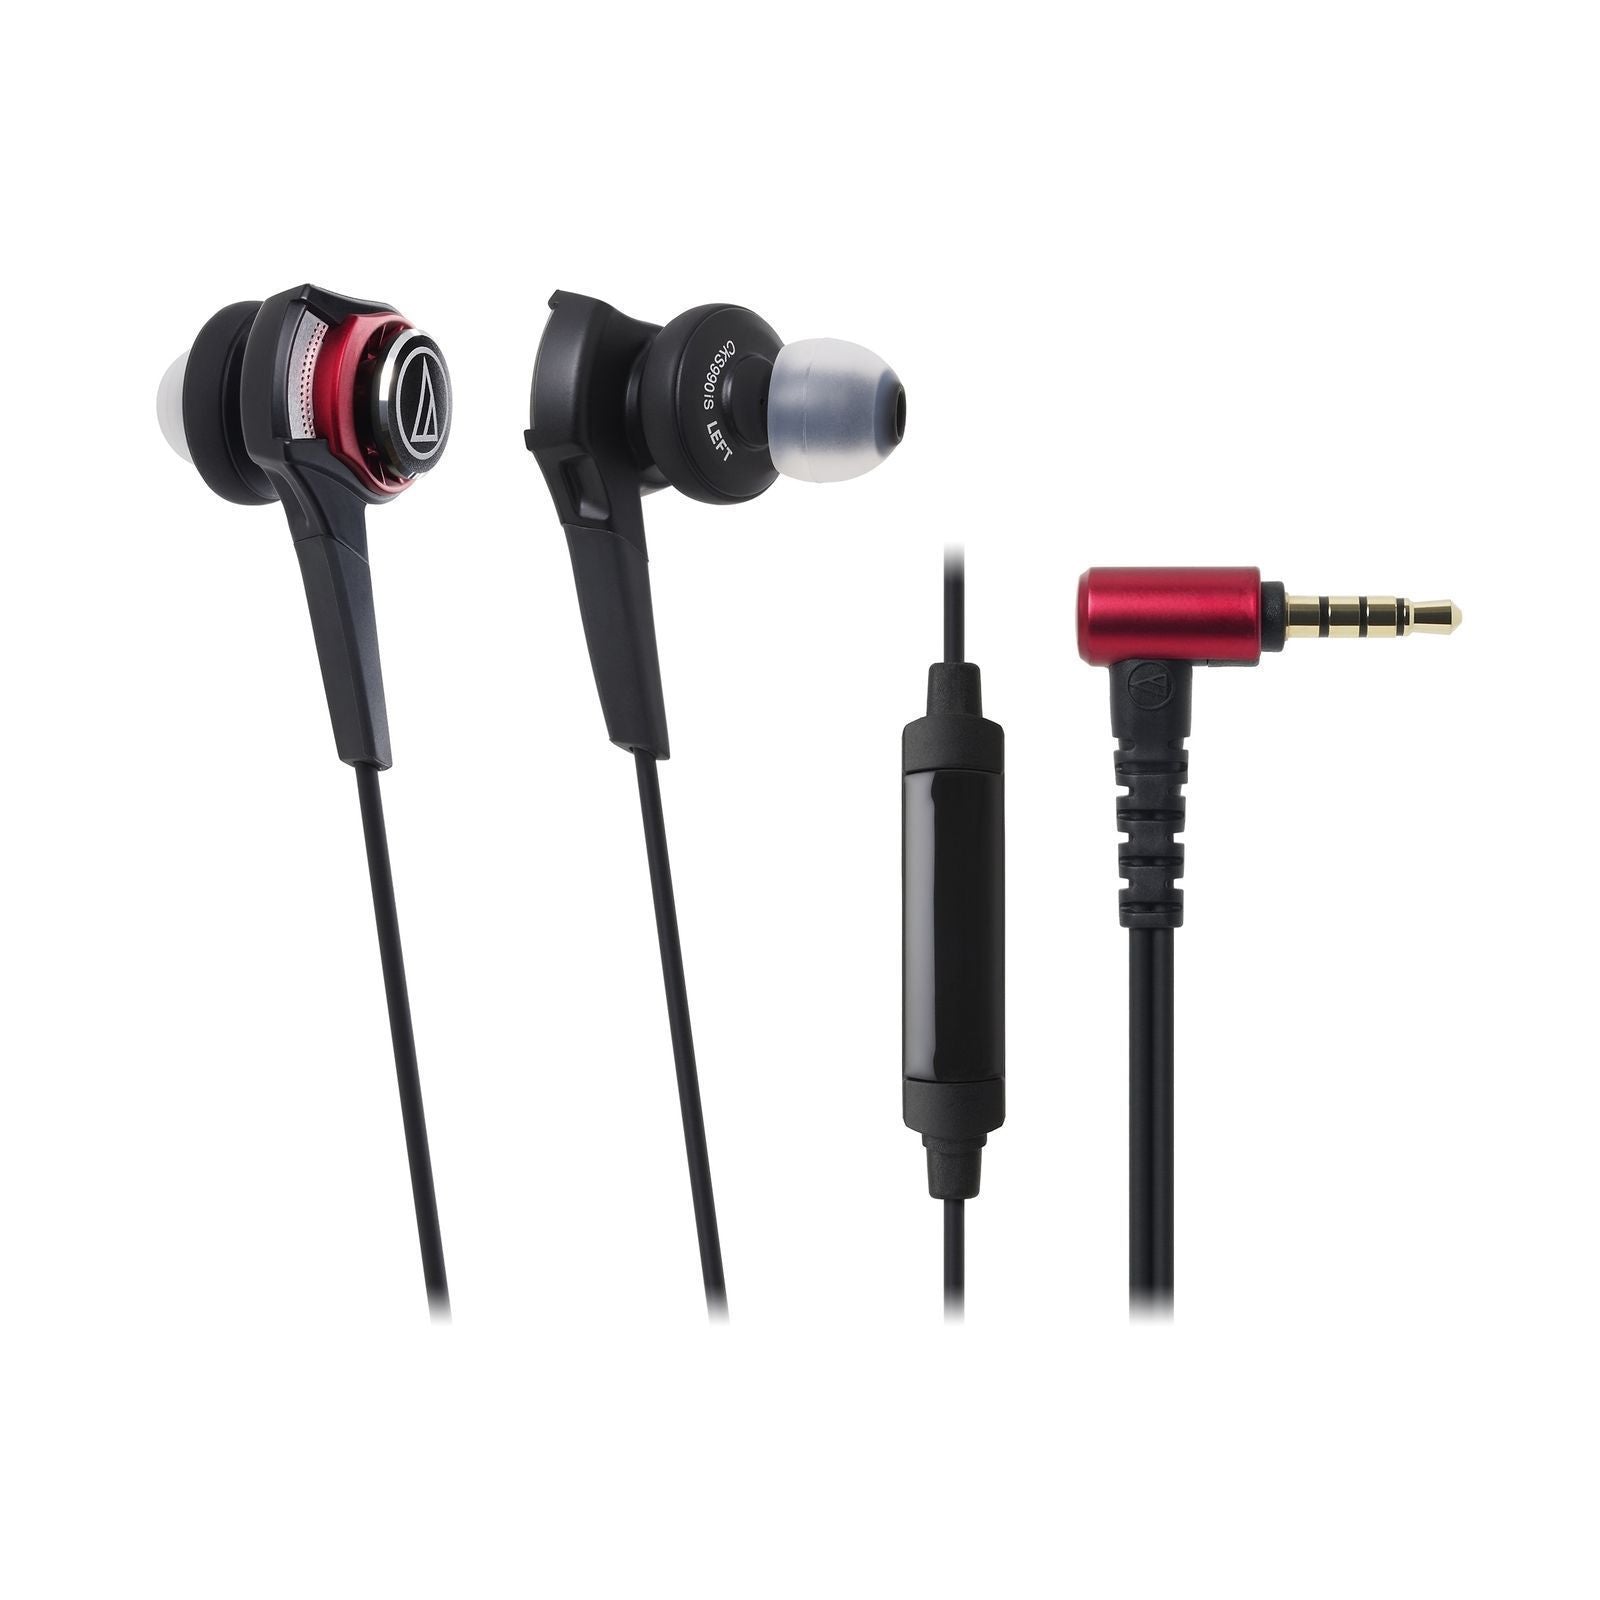 Audio-Technica ATH-CKS990iS Solid Bass In-Ear Headphones with In-line Mic & Control